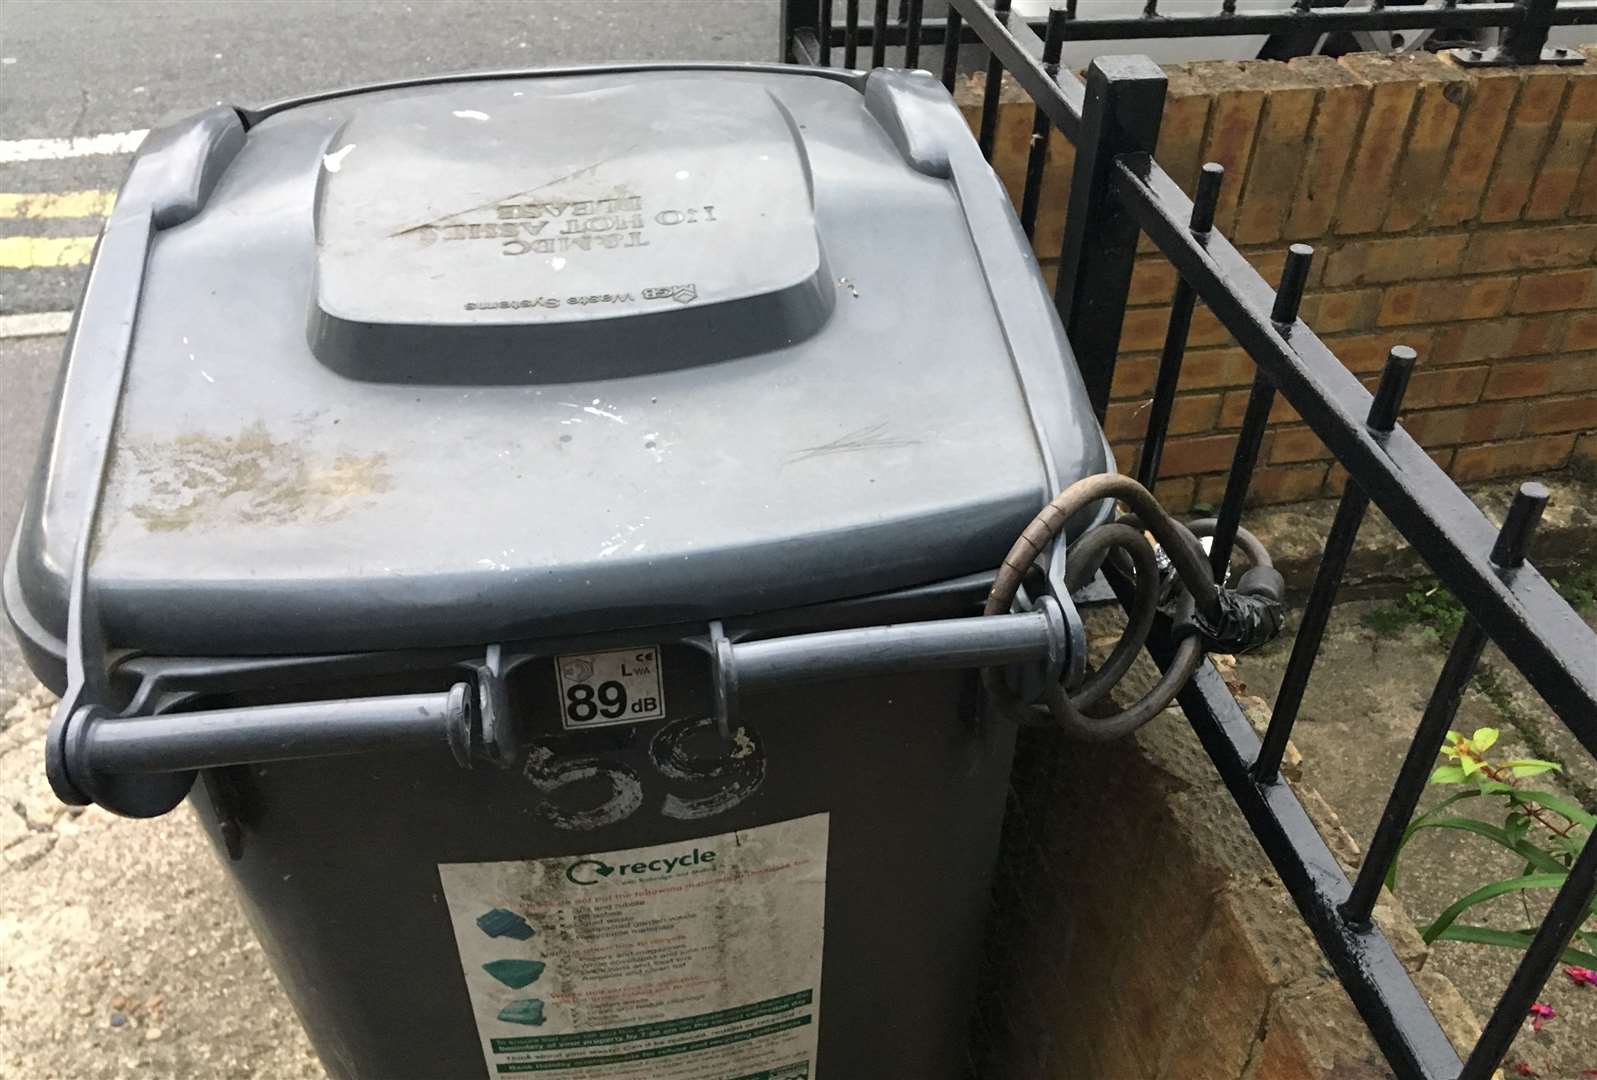 One neighbour padlocked her dustbin to railings over concerns at Aylesford Village Club